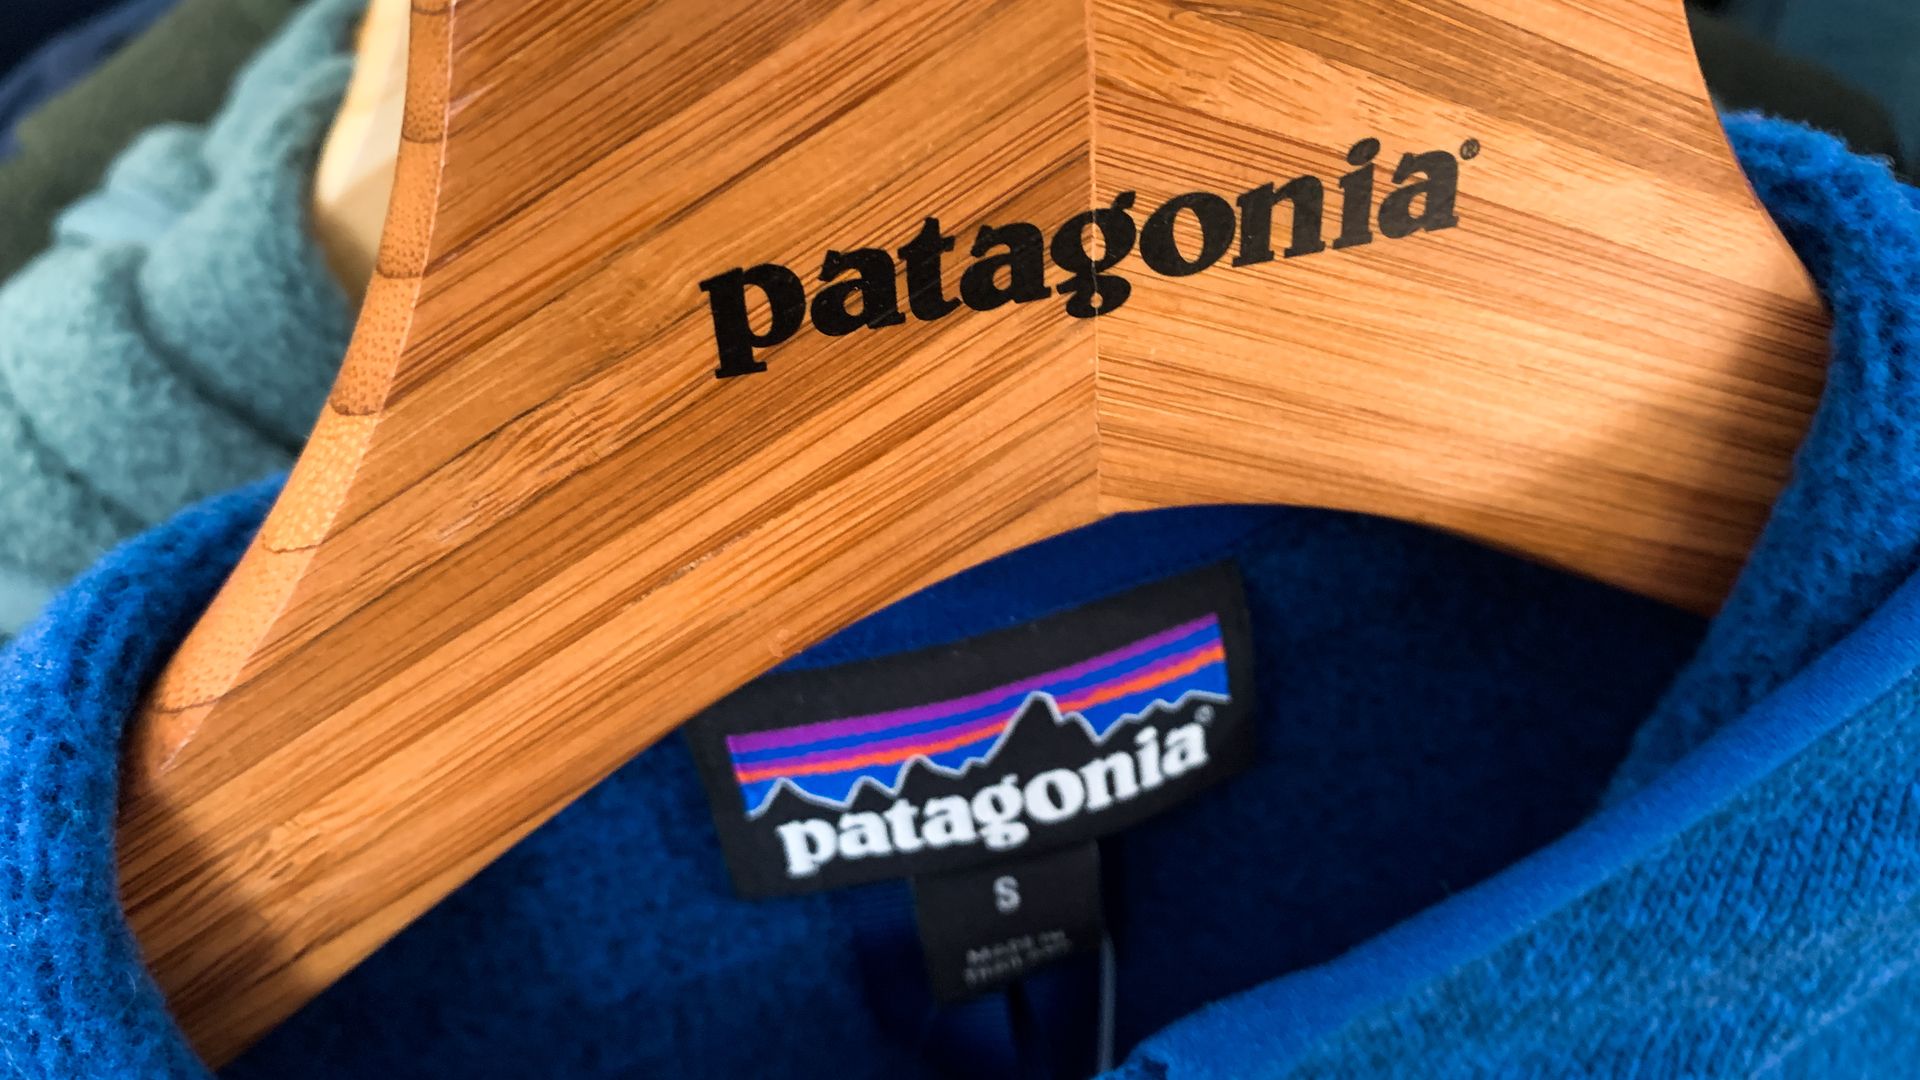 The Patagonia brand appears on a clothes hanger made out of wood.